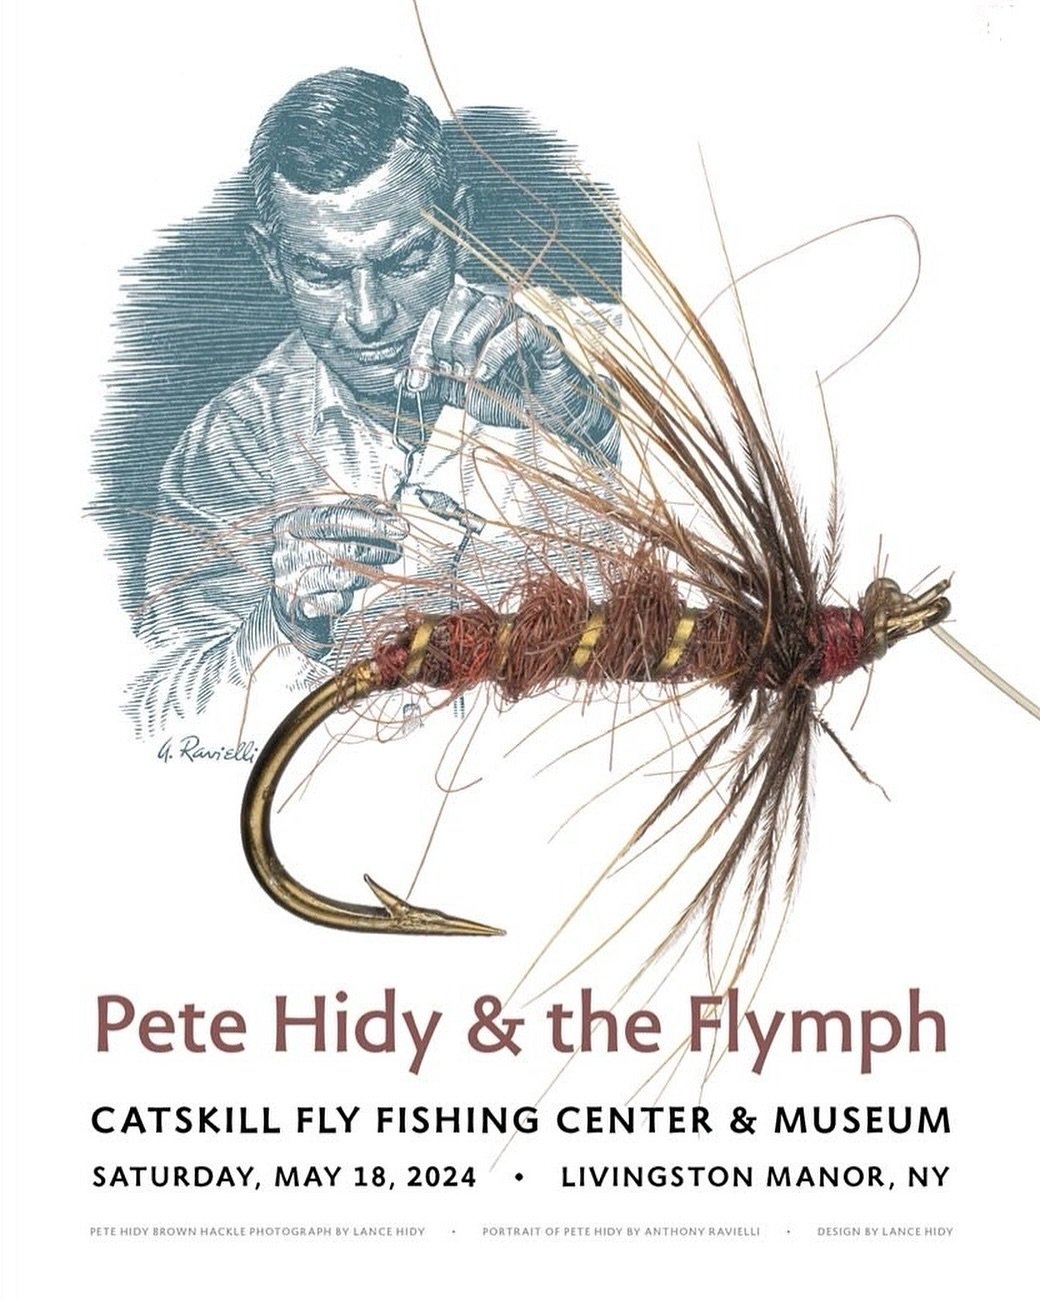 Join us next Saturday for a very special program. Pete Hidy and the Flymph.

10:30 AM-12:00 PM-FLYMPH TYING ROUNDTABLE

11:30 AM-JOHN SHANER: &ldquo;VINCE MARINARO SPIDER FLIES&rdquo;

1:00-1:45 PM-LANCE HIDY: &ldquo;PETE HIDY&rsquo;S FRIENDSHIP WITH